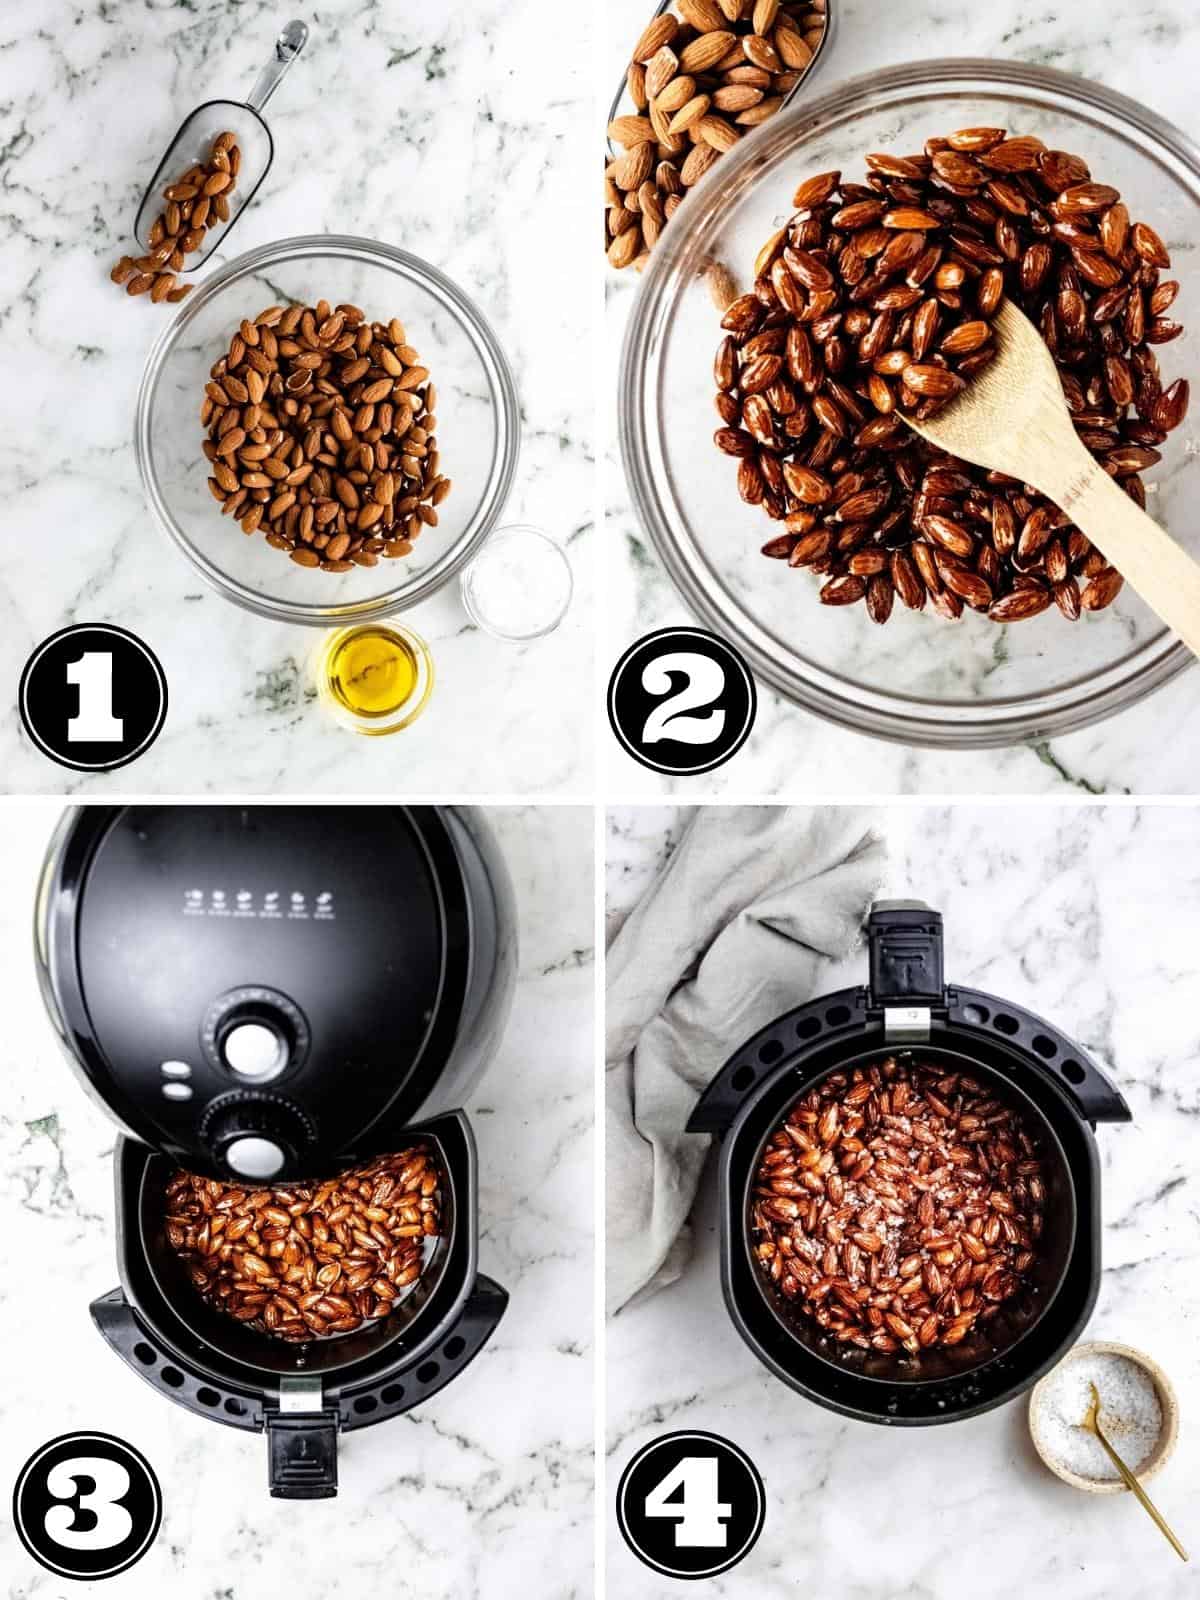 Collage image showing steps to air fry roasted almonds.